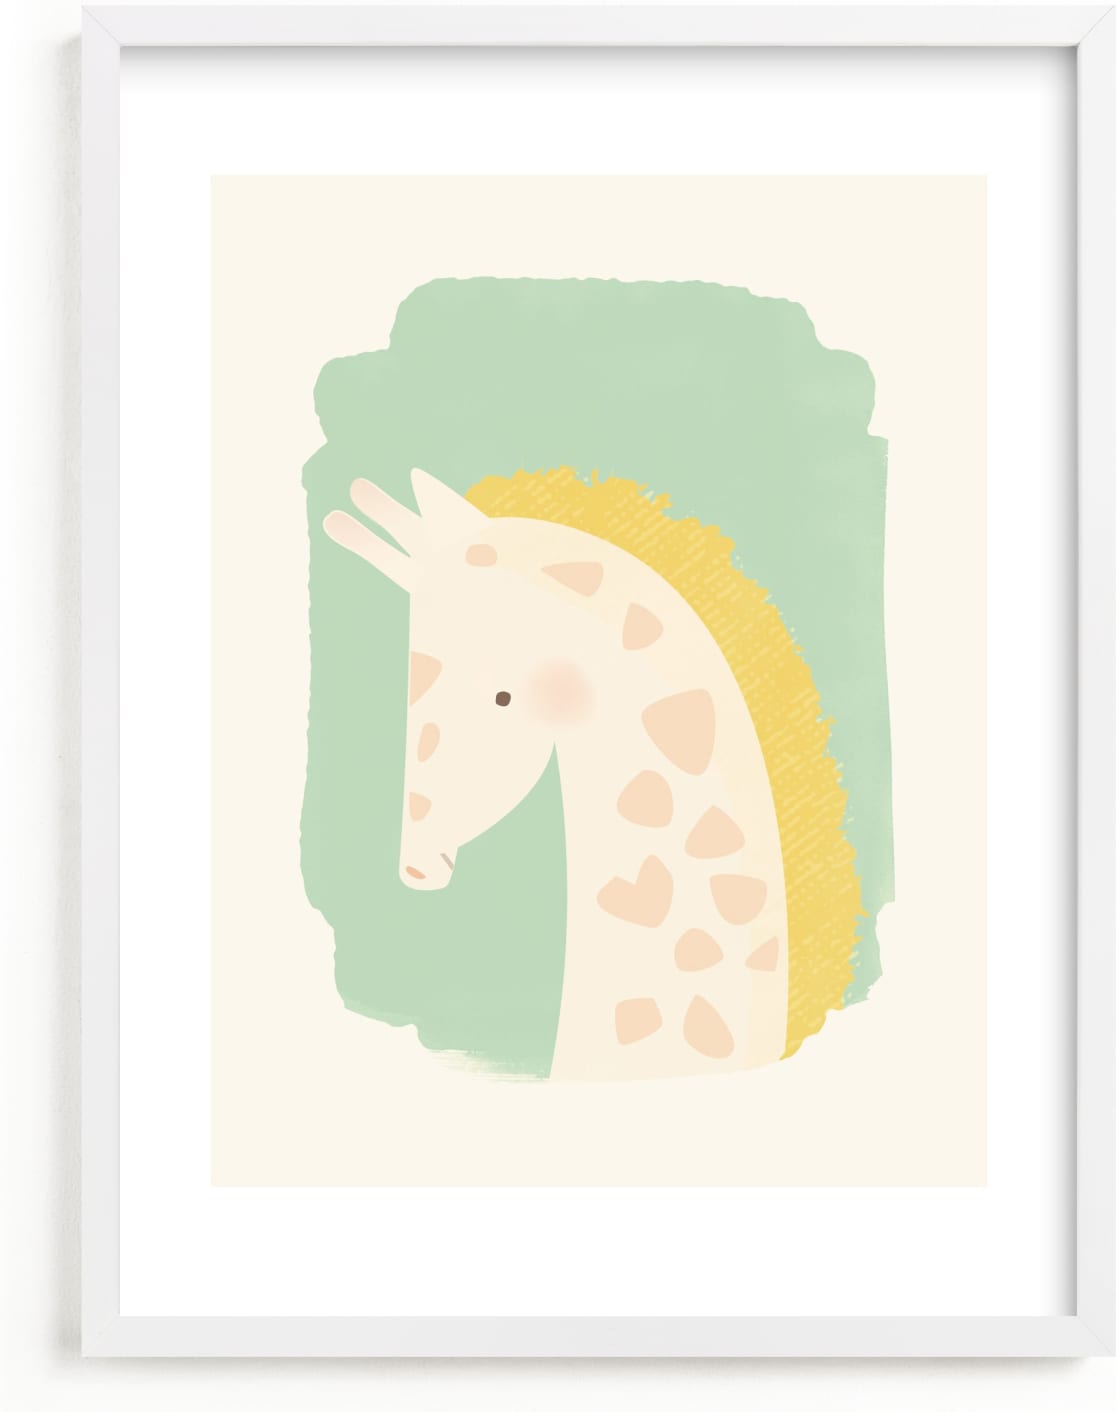 This is a yellow nursery wall art by Lori Wemple called Valentine Zoo Giraffe.